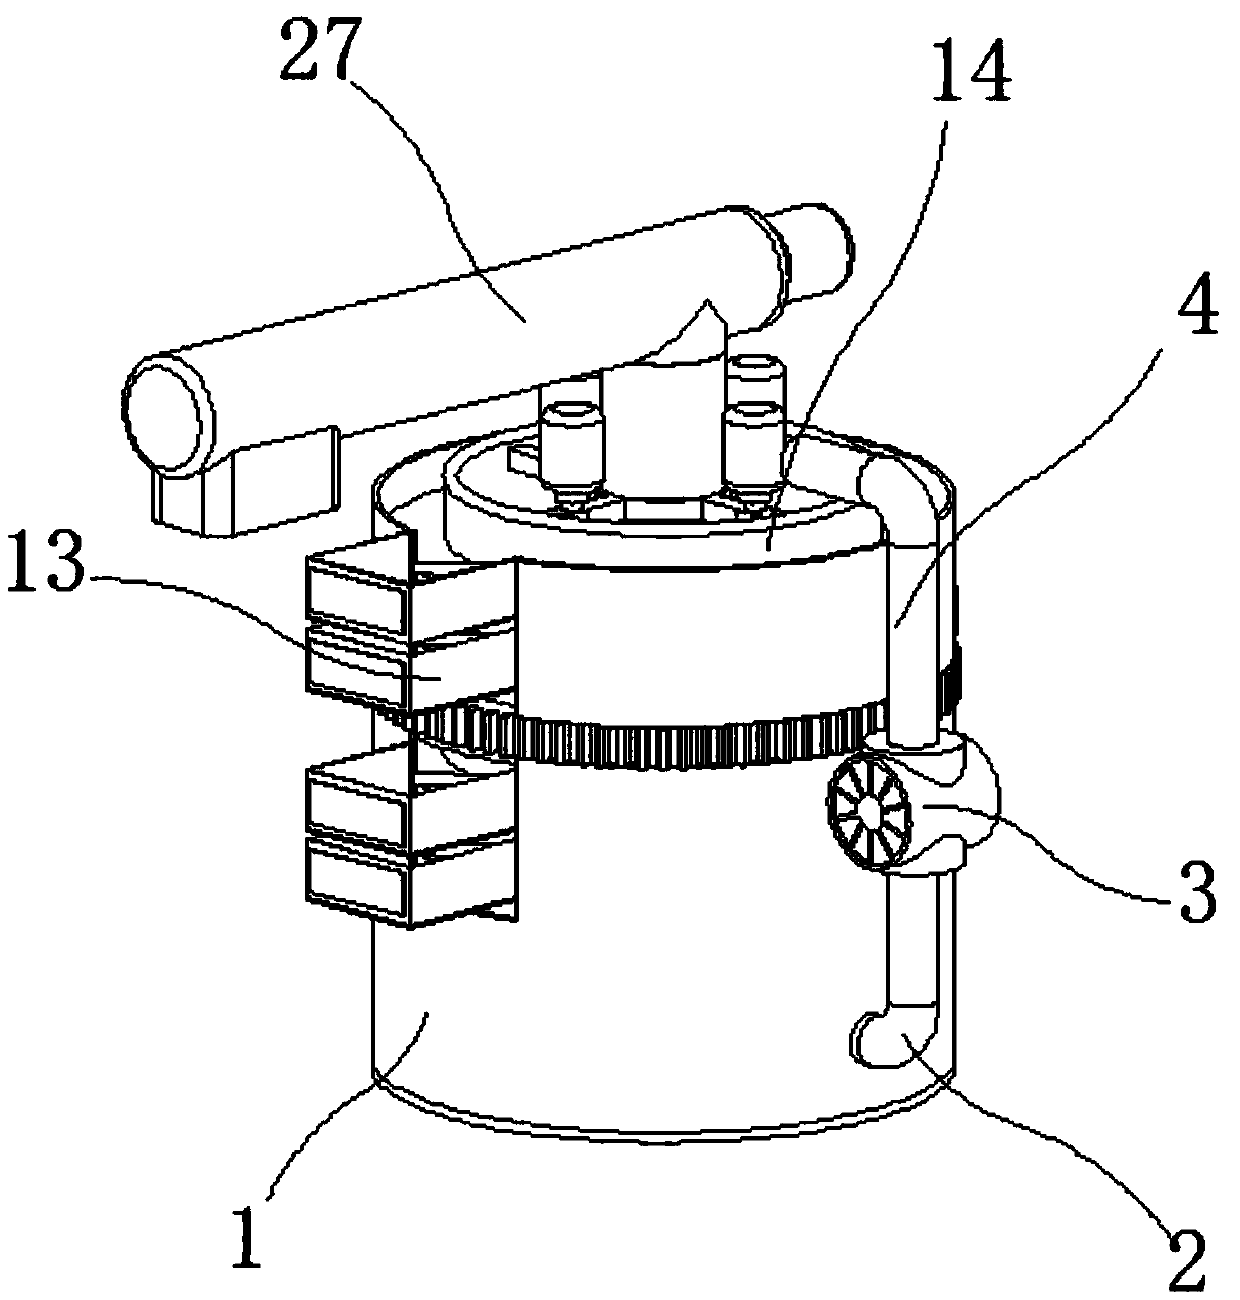 Device for separating microplastics from soil